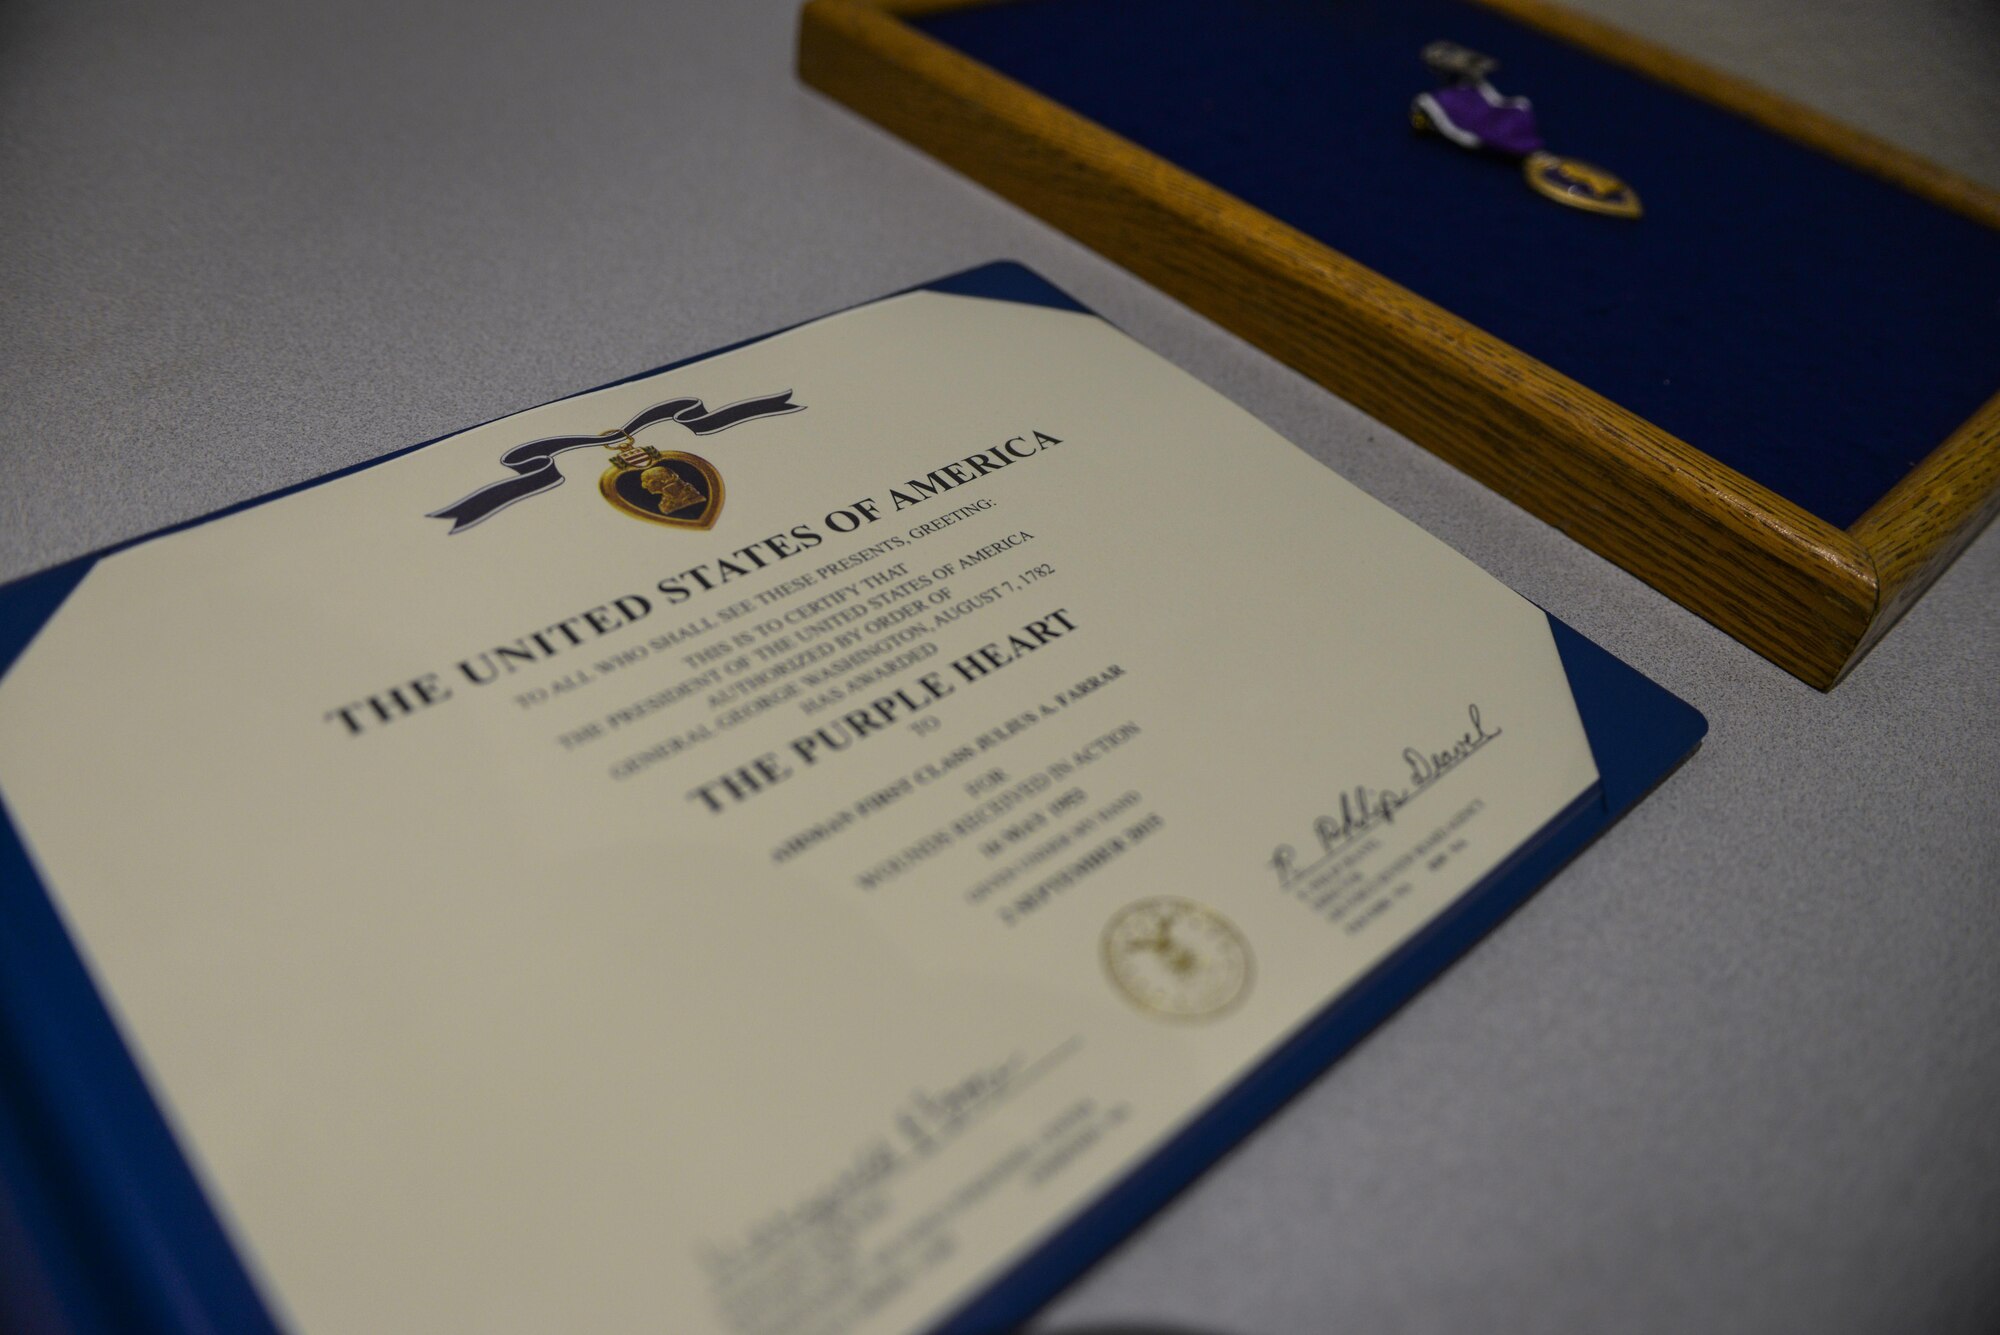 The Purple Heart was presented to retired Airman 1st Class Julius Farrar at Nellis Air Force Base, Nev., April 28, 2016. The Purple Heart is one of the most recognized and respected medals awarded to members of the United States armed forces. (U.S. Air Force photo by Airman 1st Class Kevin Tanenbaum)